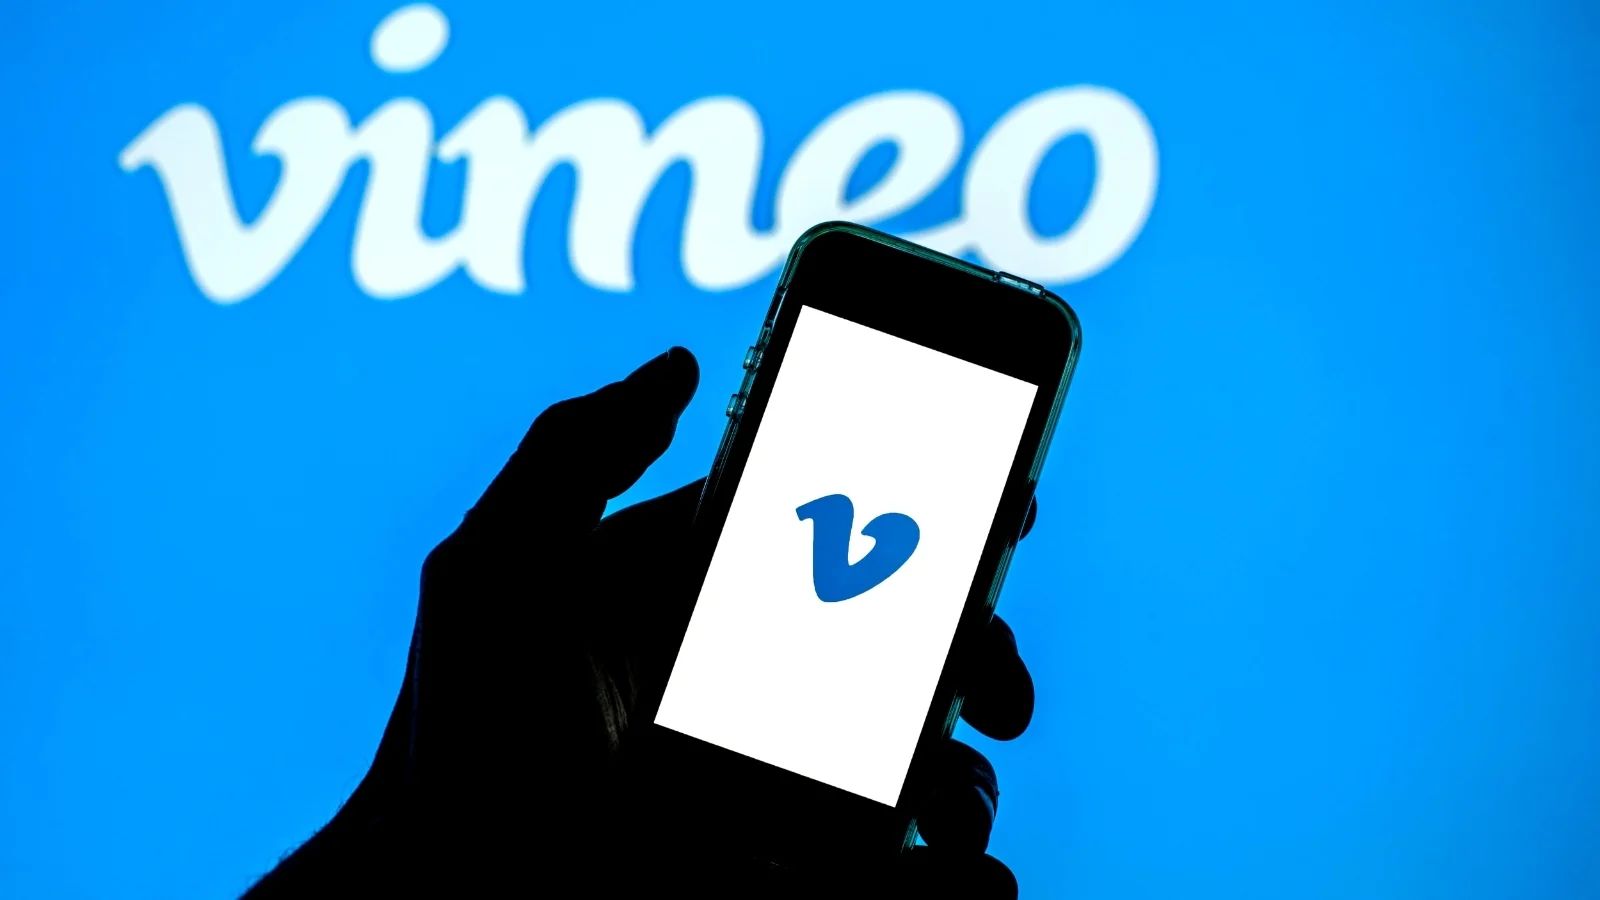 10 Mind-blowing Facts About Vimeo